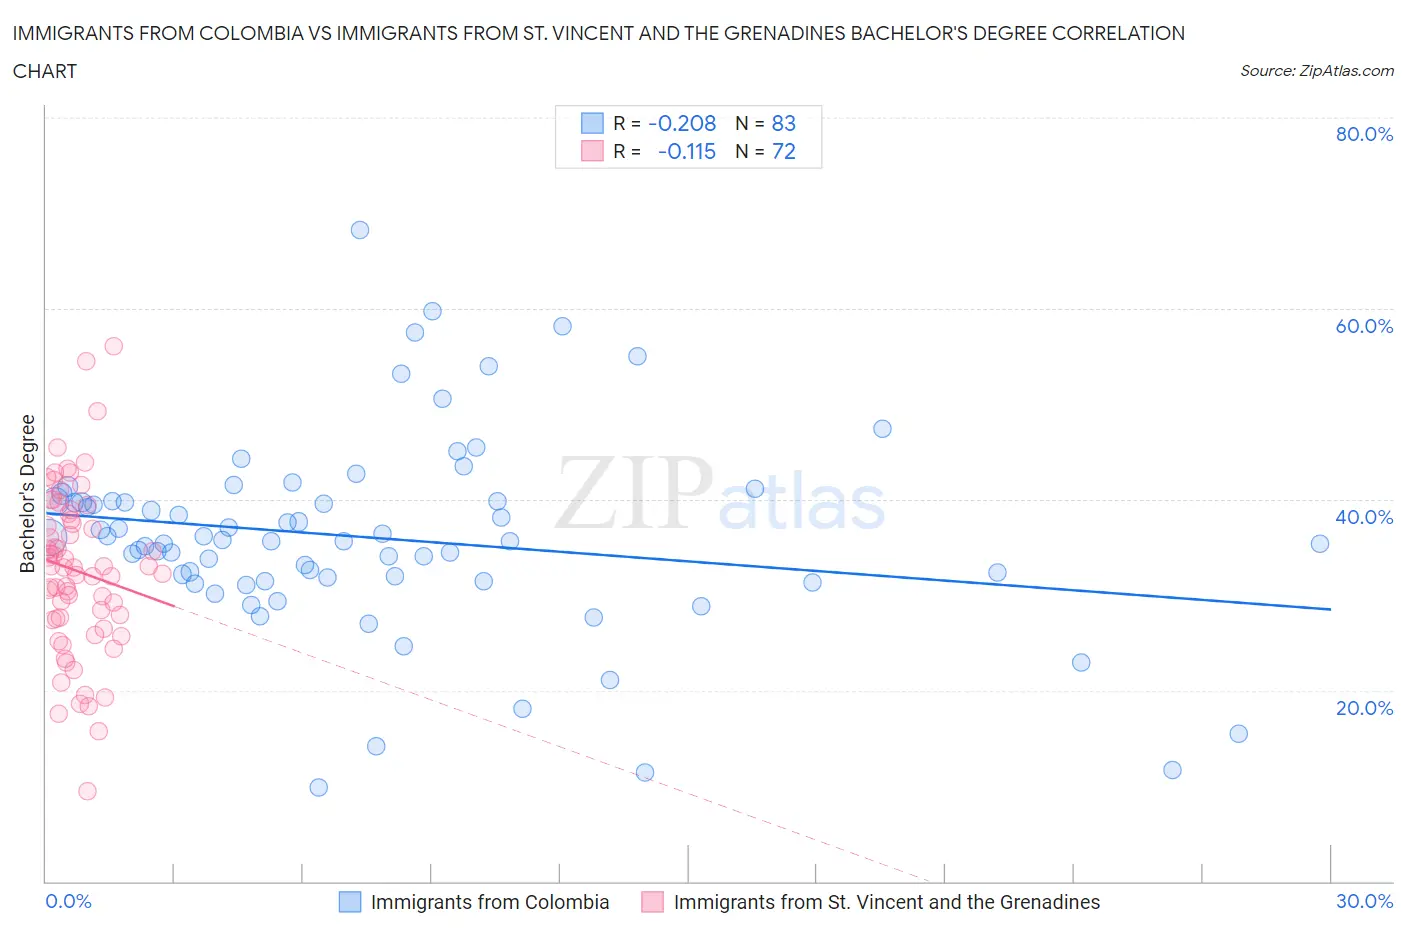 Immigrants from Colombia vs Immigrants from St. Vincent and the Grenadines Bachelor's Degree